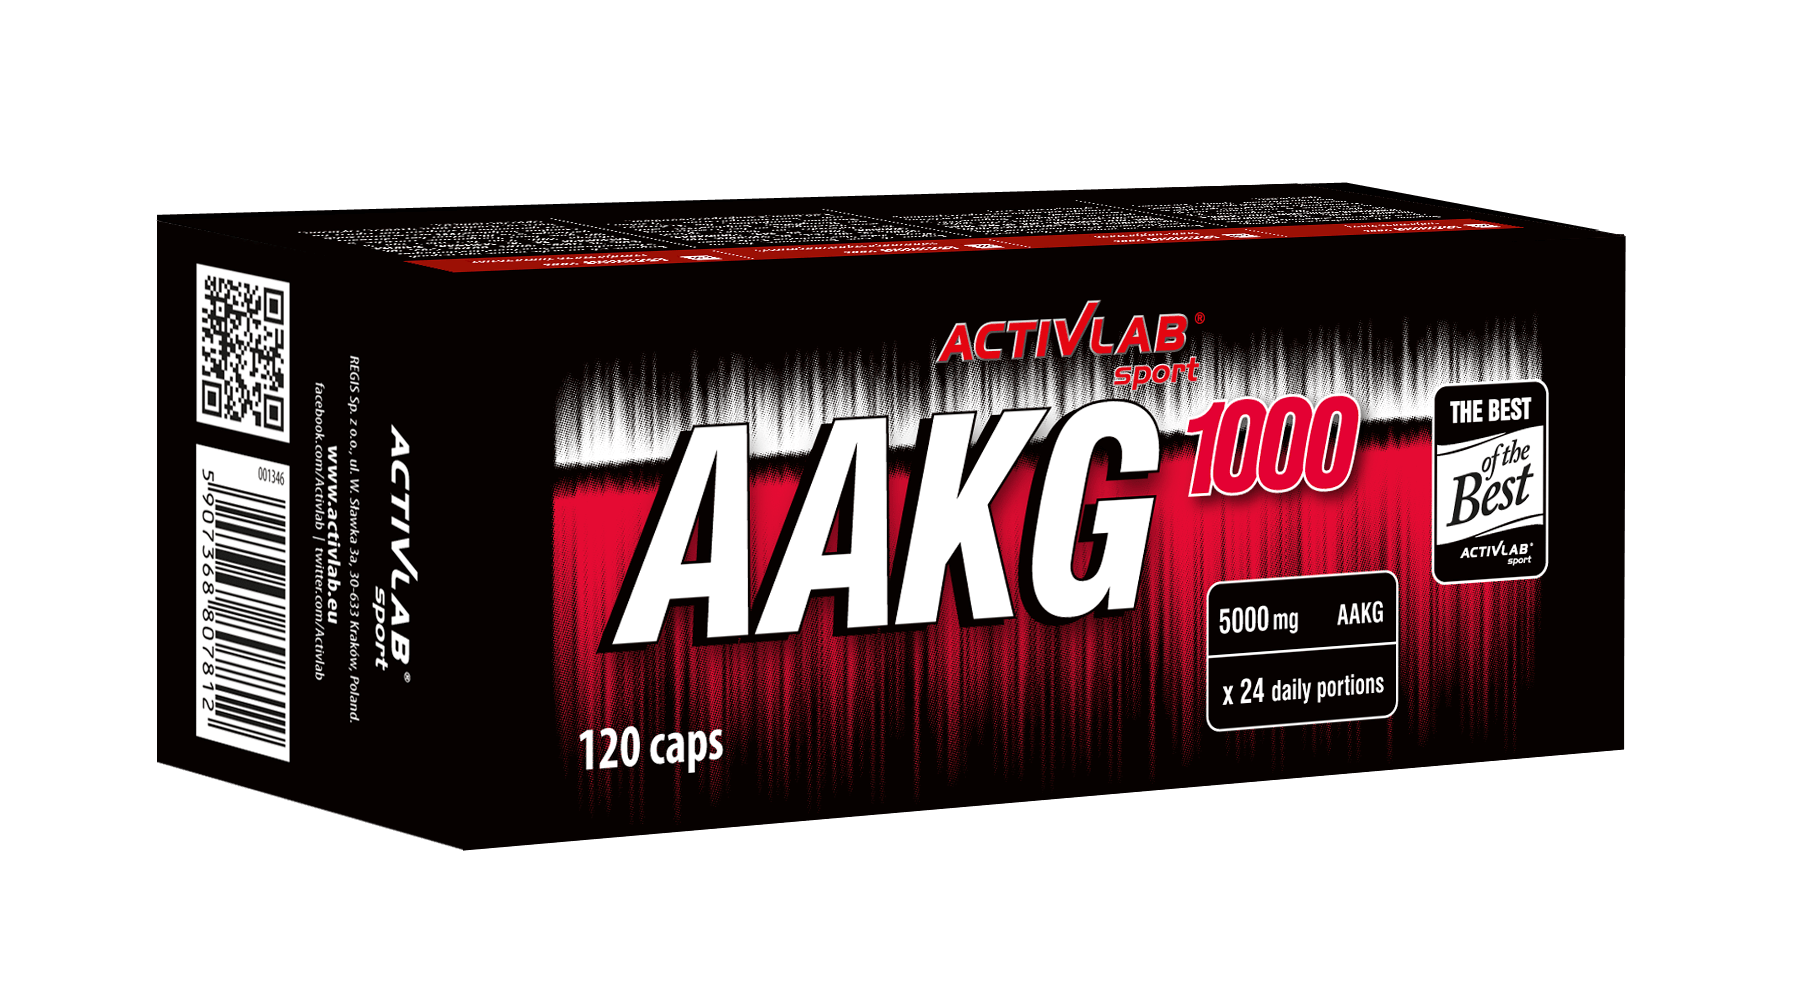 AAKG 1000, 120 pcs, ActivLab. Arginine. recovery Immunity enhancement Muscle pumping Antioxidant properties Lowering cholesterol Nitric oxide donor 